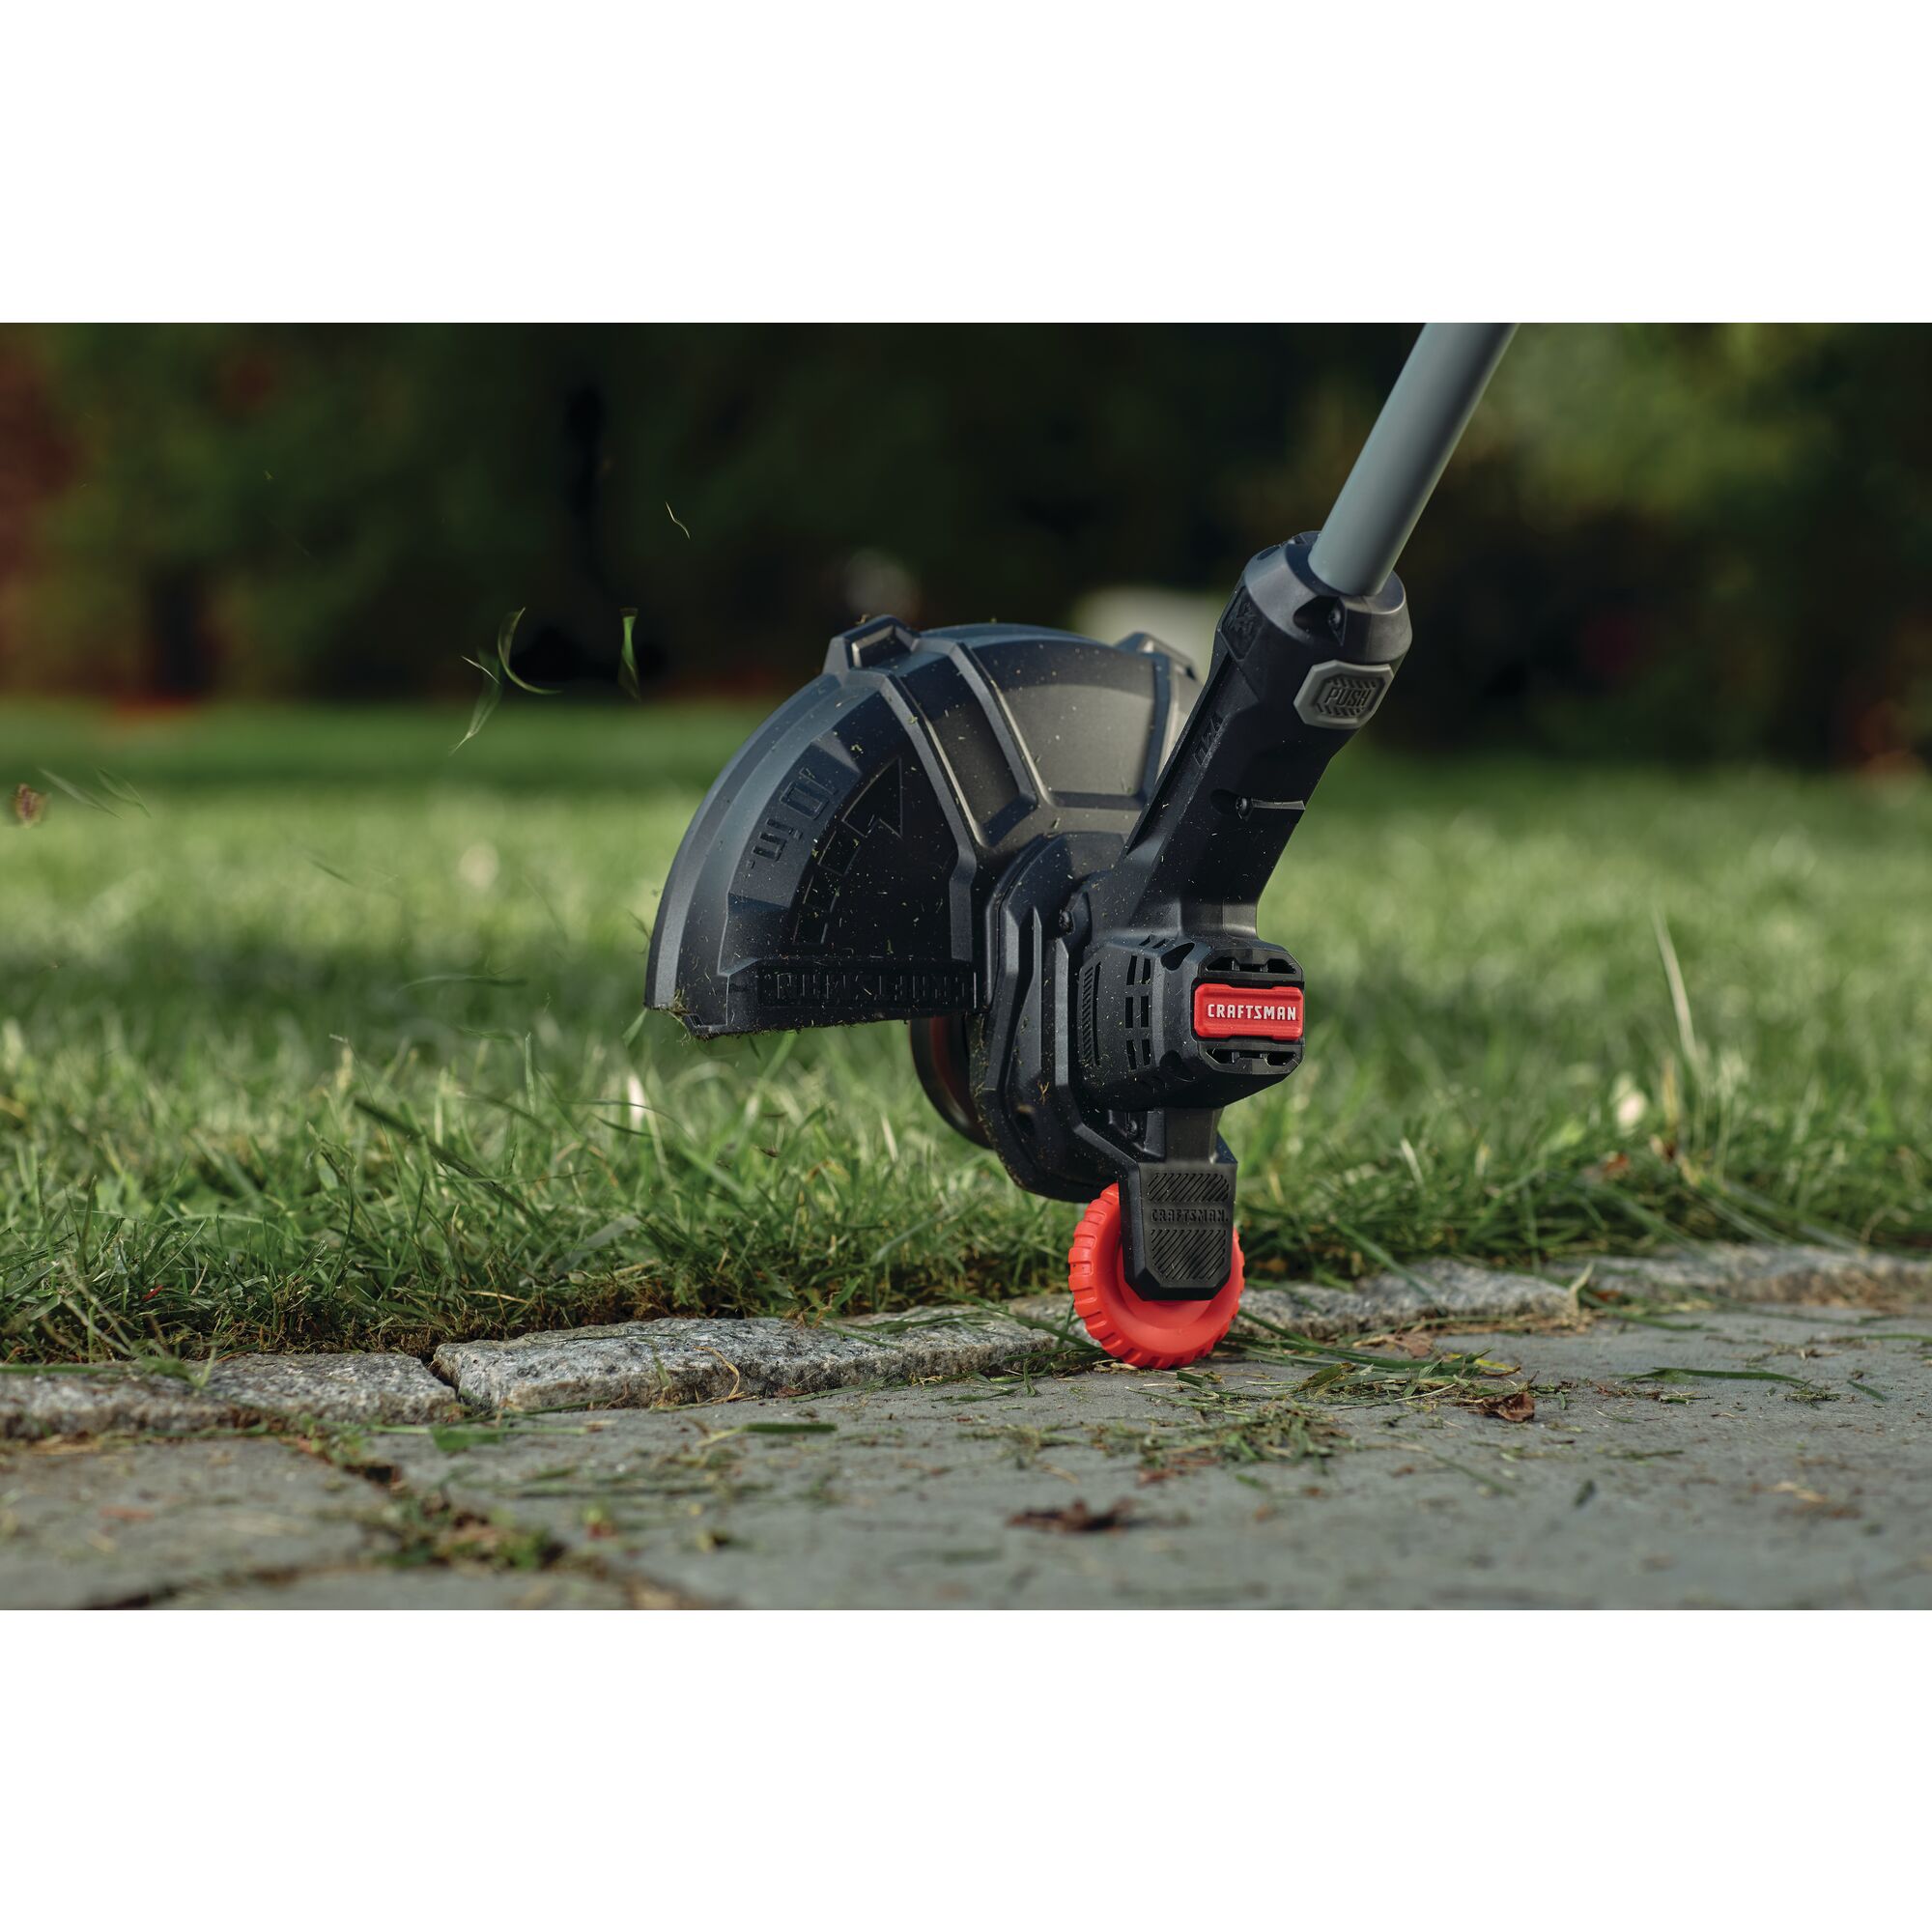 Integrated wheel edged guide feature of 20 volt cordless 10 inch weedwacker string trimmer and edger.